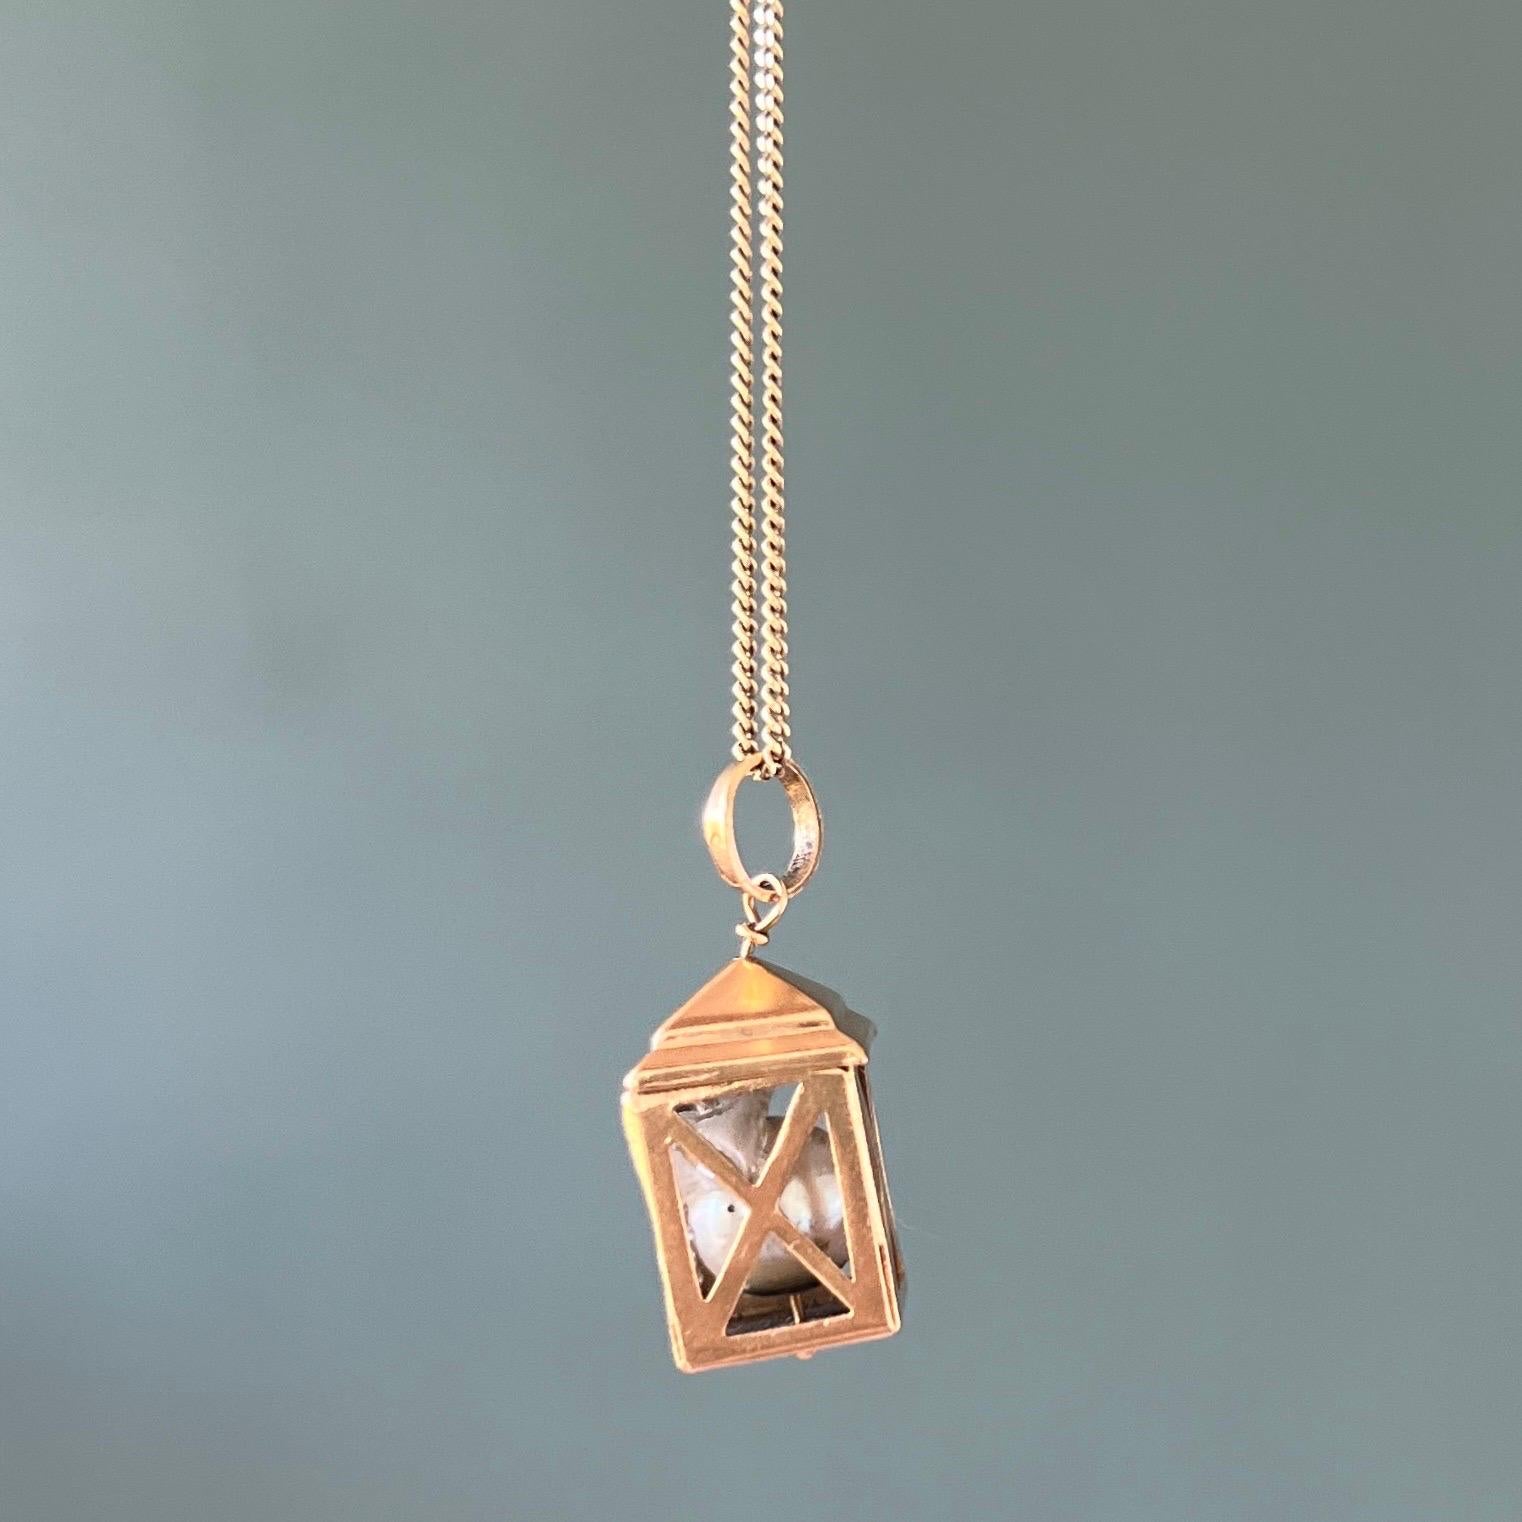 A vintage 18 karat yellow gold Italian lantern charm pendant. This vintage lantern has some great details. The cage has openwork detailing with a synthetic pearl inside the lantern. The top of the lantern has a closed lid.

Collect your own charms